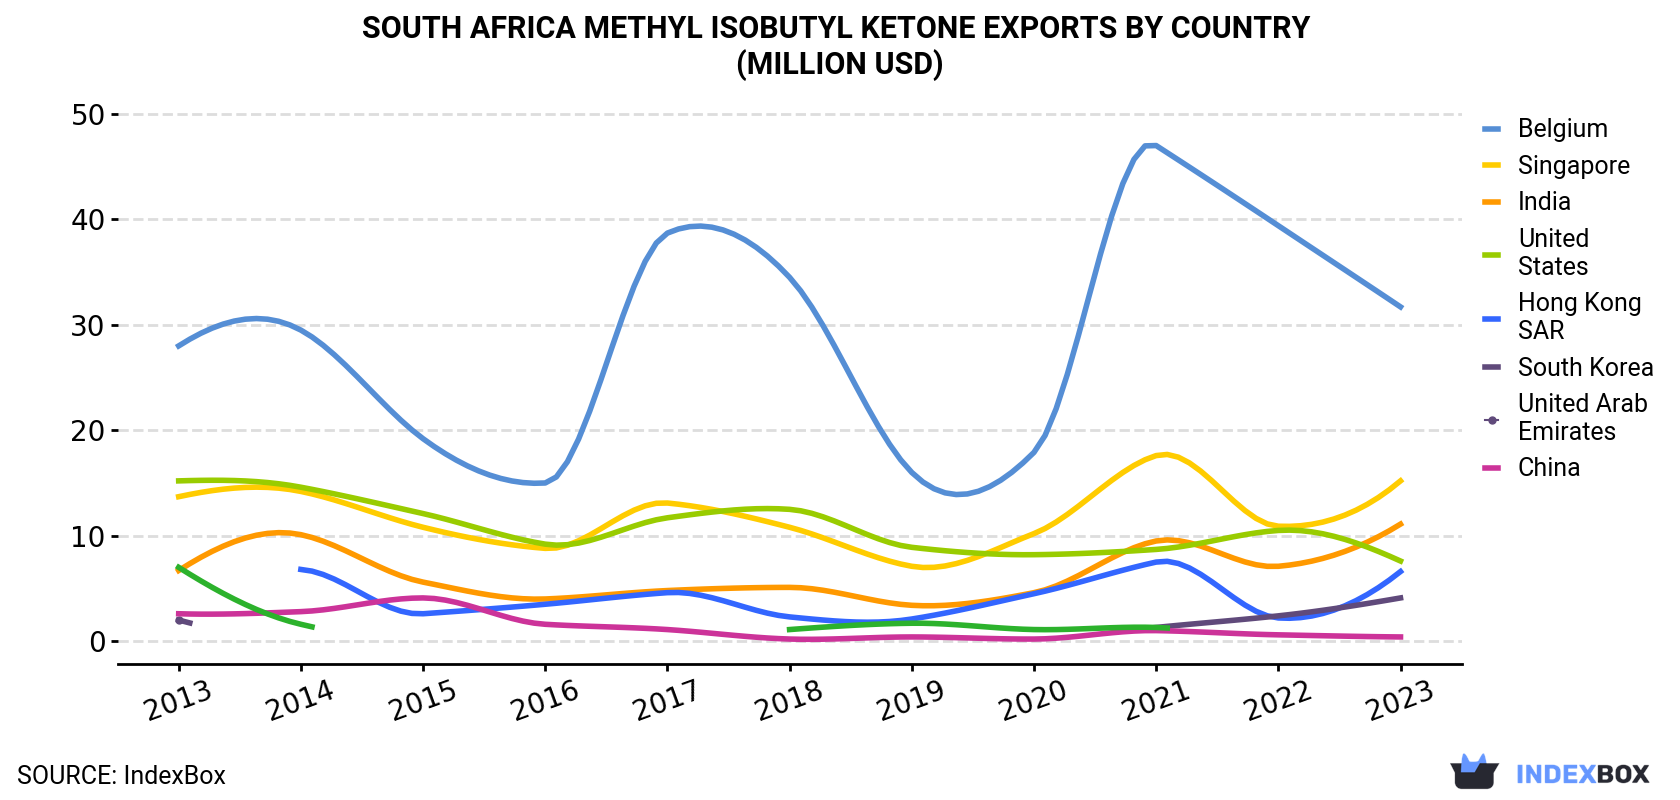 South Africa Methyl Isobutyl Ketone Exports By Country (Million USD)